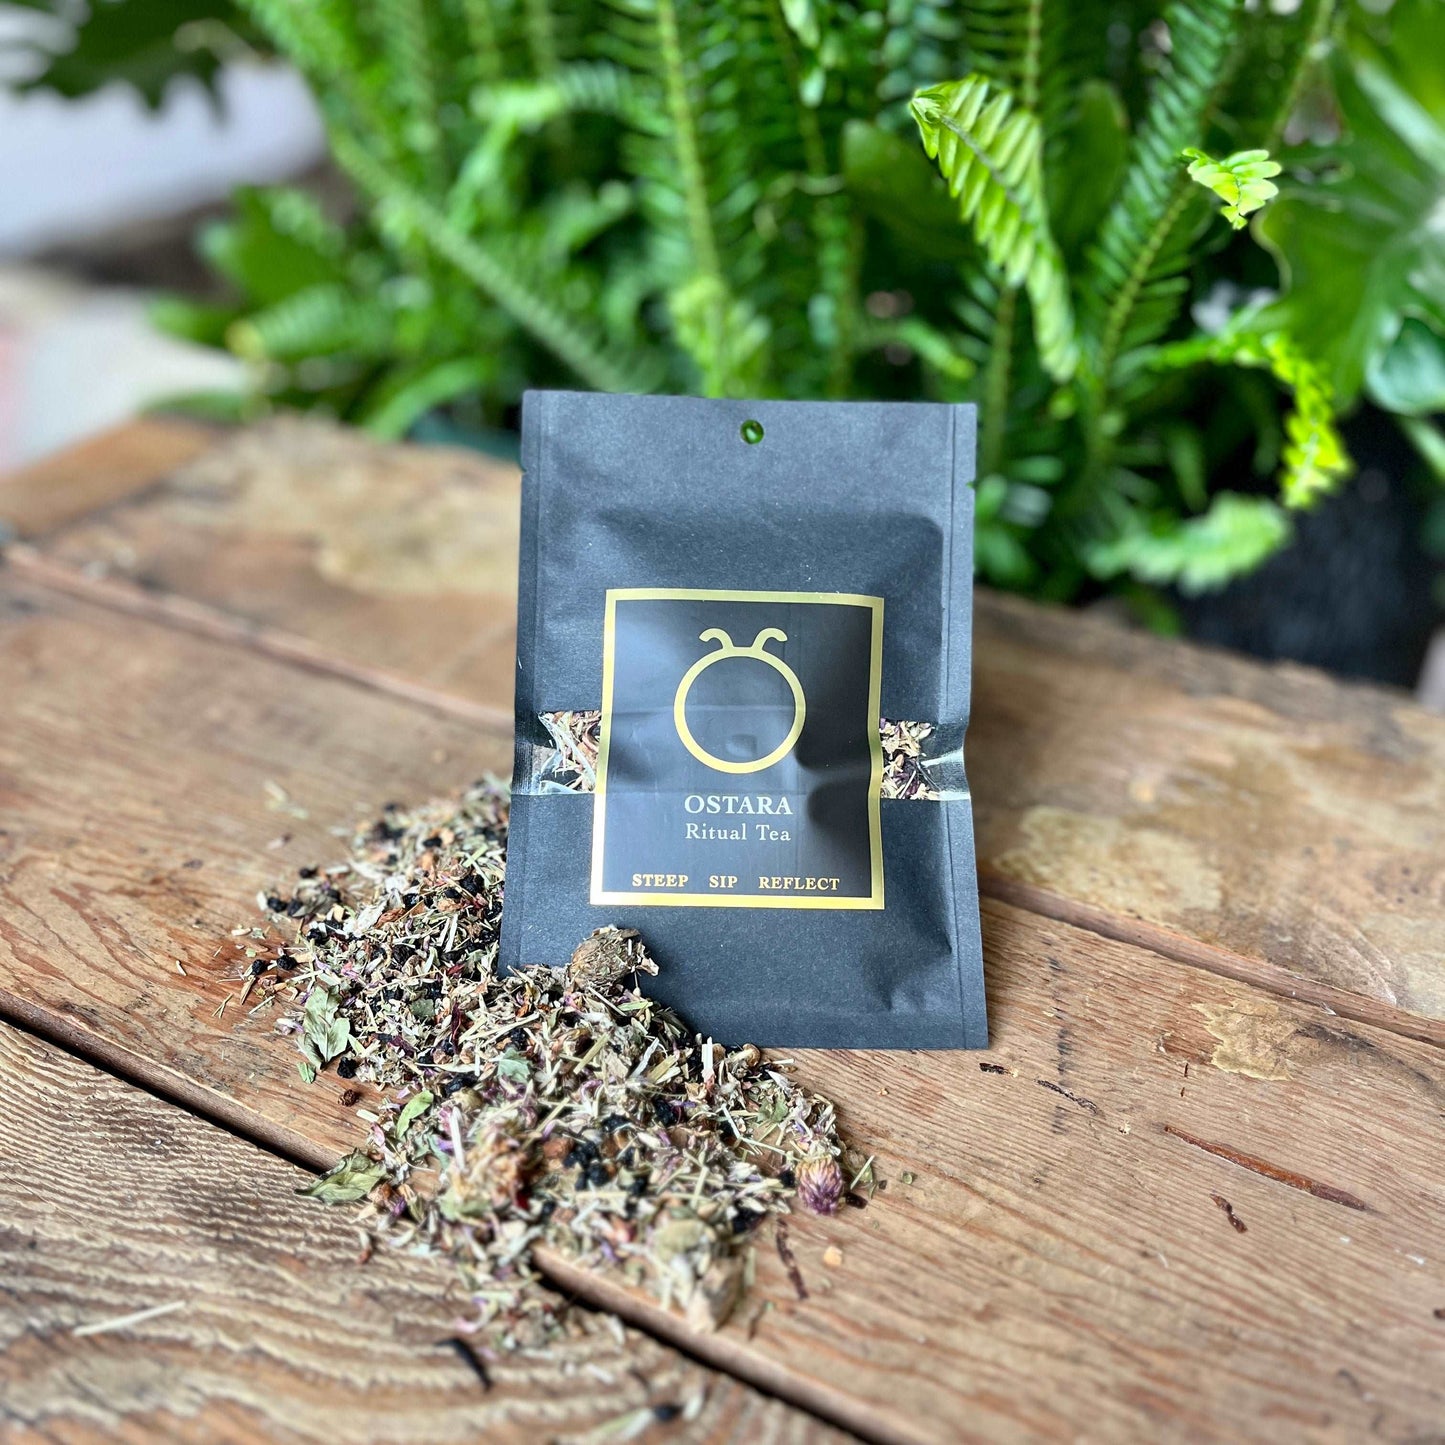 Welcome the arrival of spring with our Ostara | Spring Equinox Ritual Tea. This organic blend features elderberries, roasted dandelion root, red clover, cassia chips, oat straw, licorice, raspberry leaf, marshmallow root, hibiscus, and nettle leaf. Crafted to harmonize with the energy of renewal, this herbal infusion offers a vibrant and invigorating experience during your Ostara rituals. Sip and celebrate the equinox with this thoughtfully blended tea.